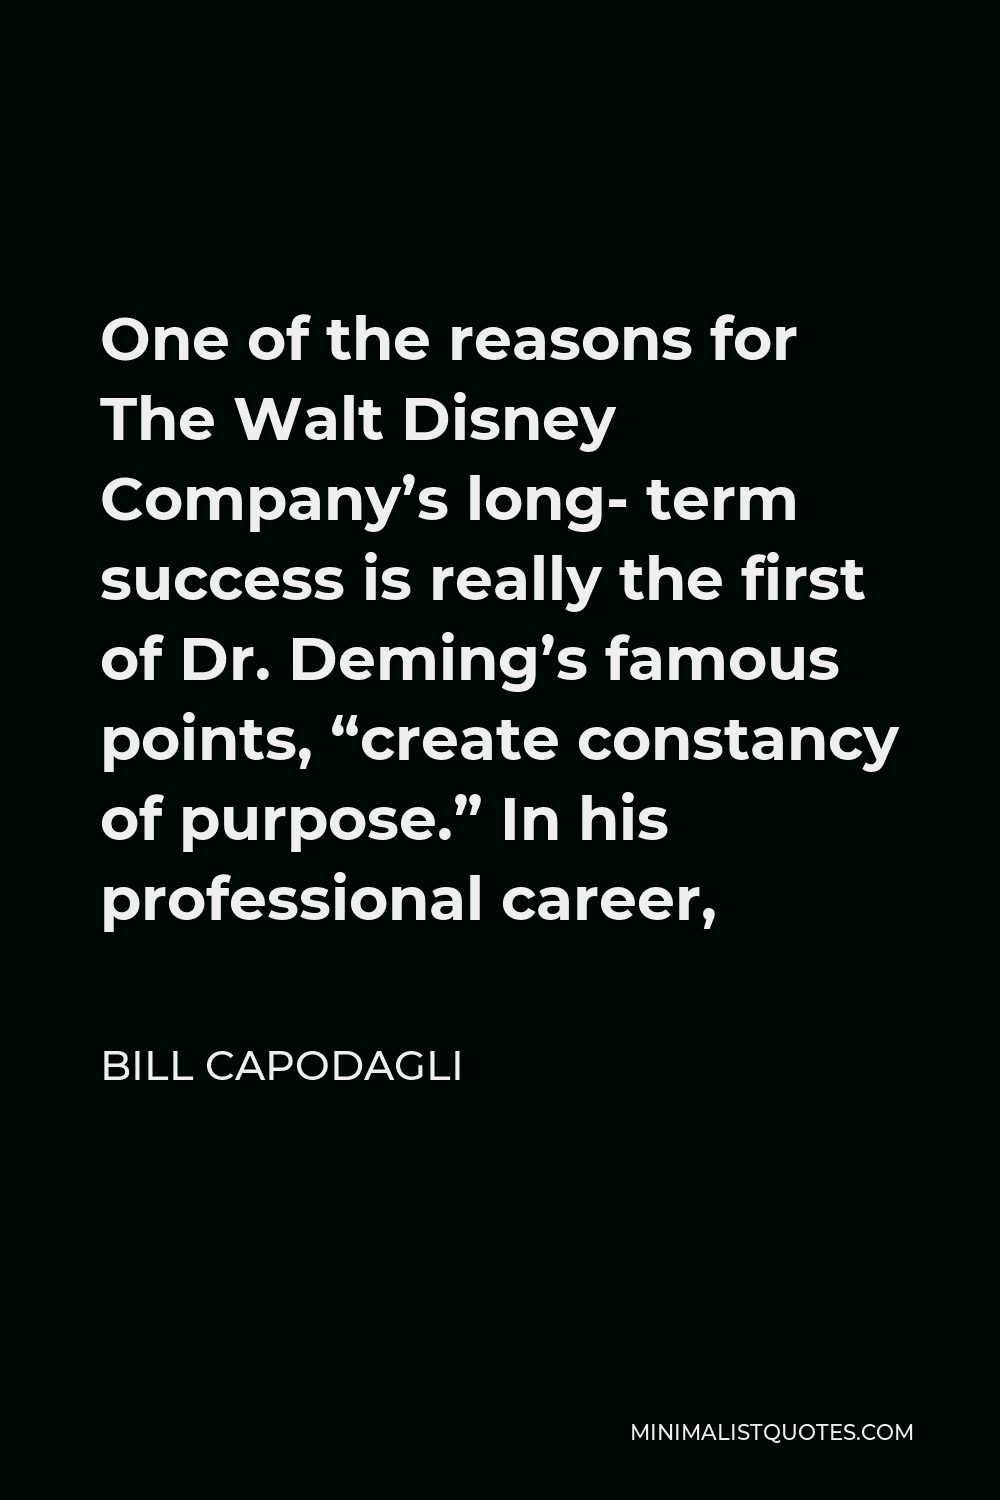 Bill Capodagli Quote - One of the reasons for The Walt Disney Company’s long- term success is really the first of Dr. Deming’s famous points, “create constancy of purpose.” In his professional career,